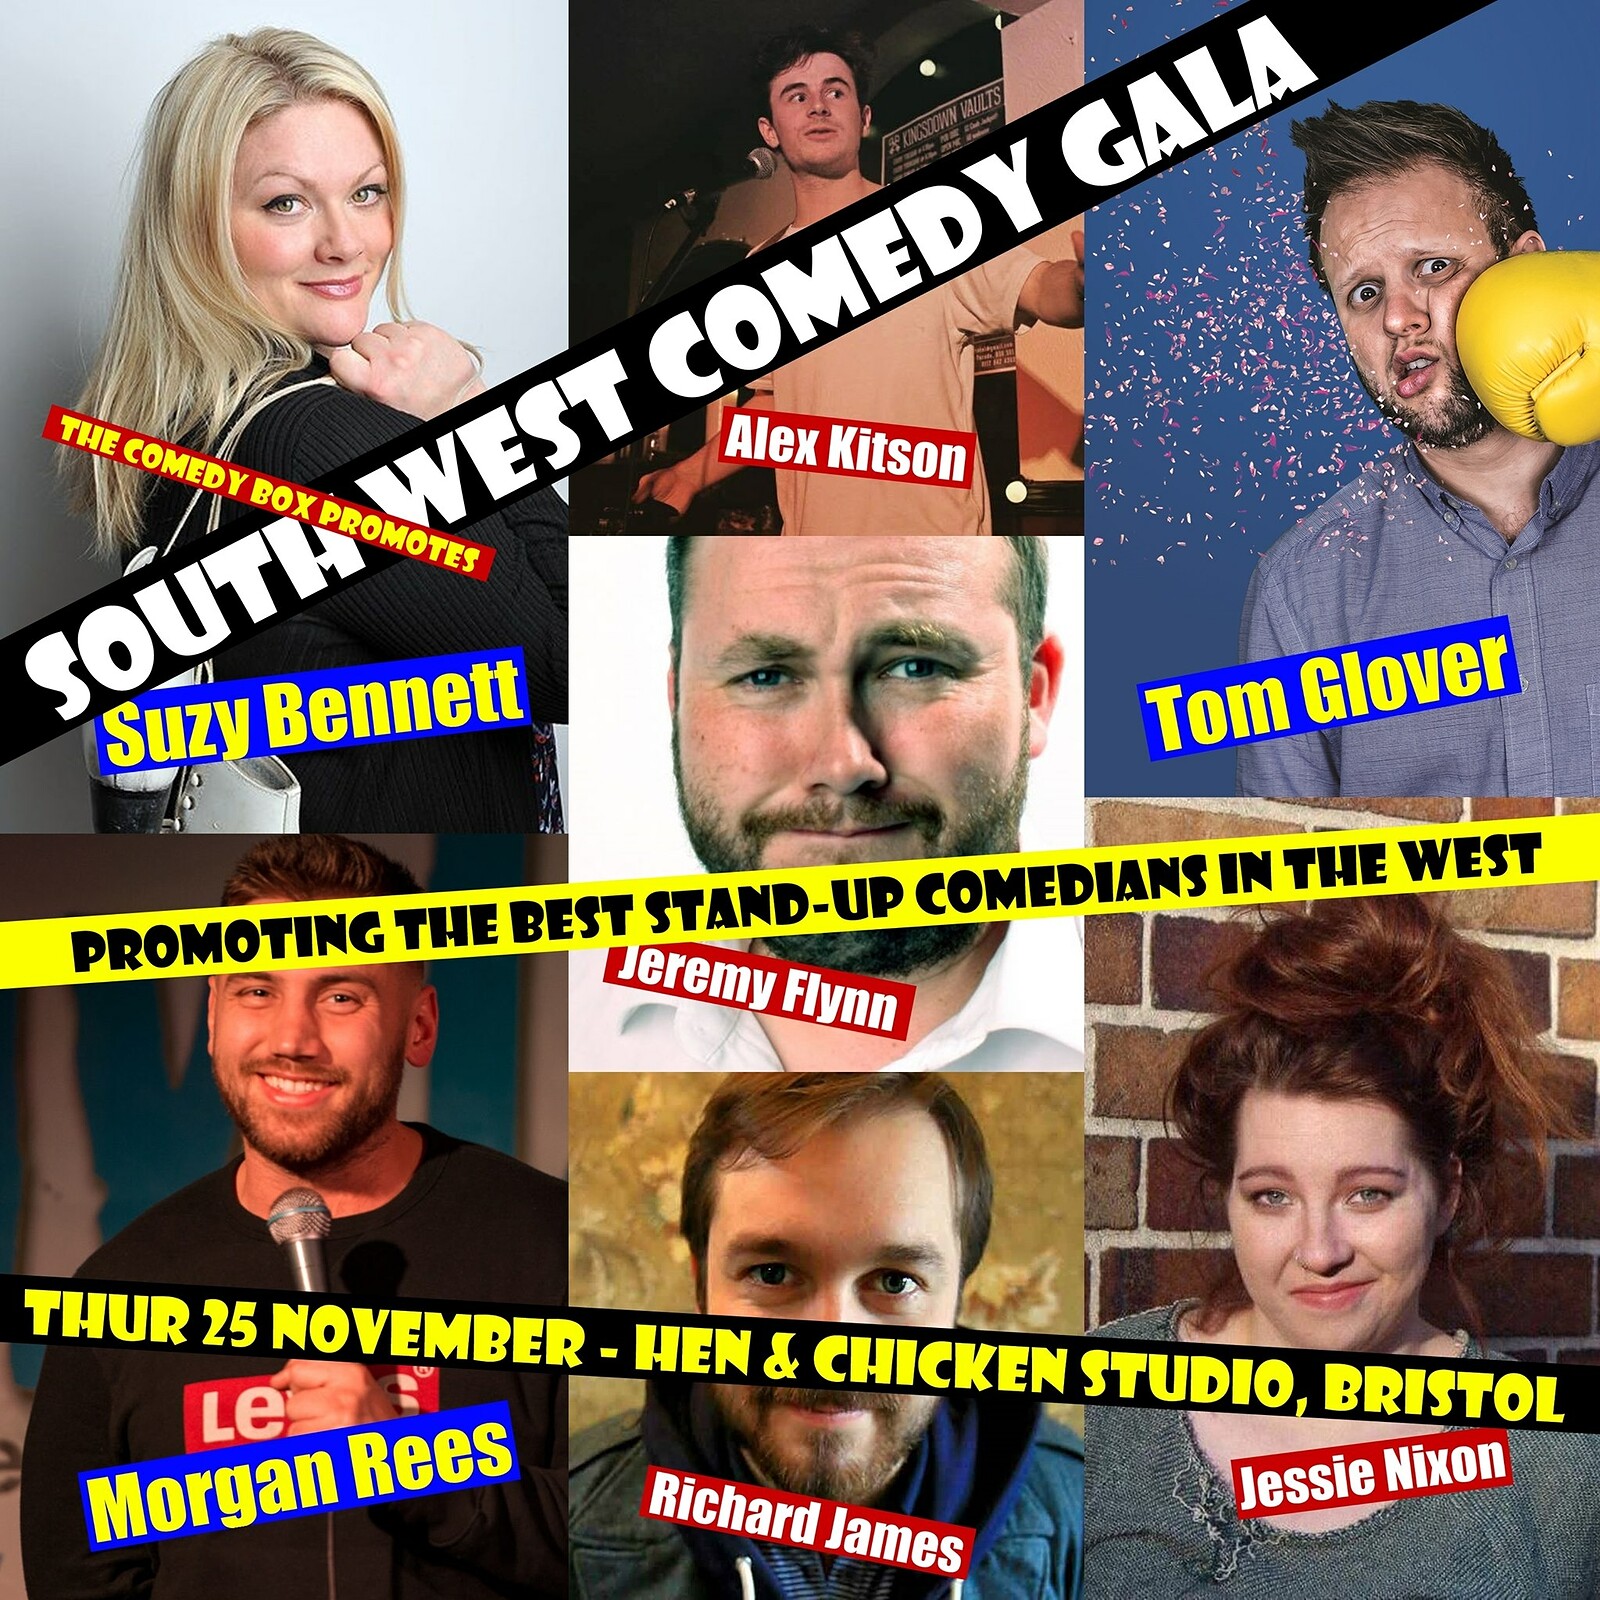 The South-West Comedy Gala at The Hen & Chicken